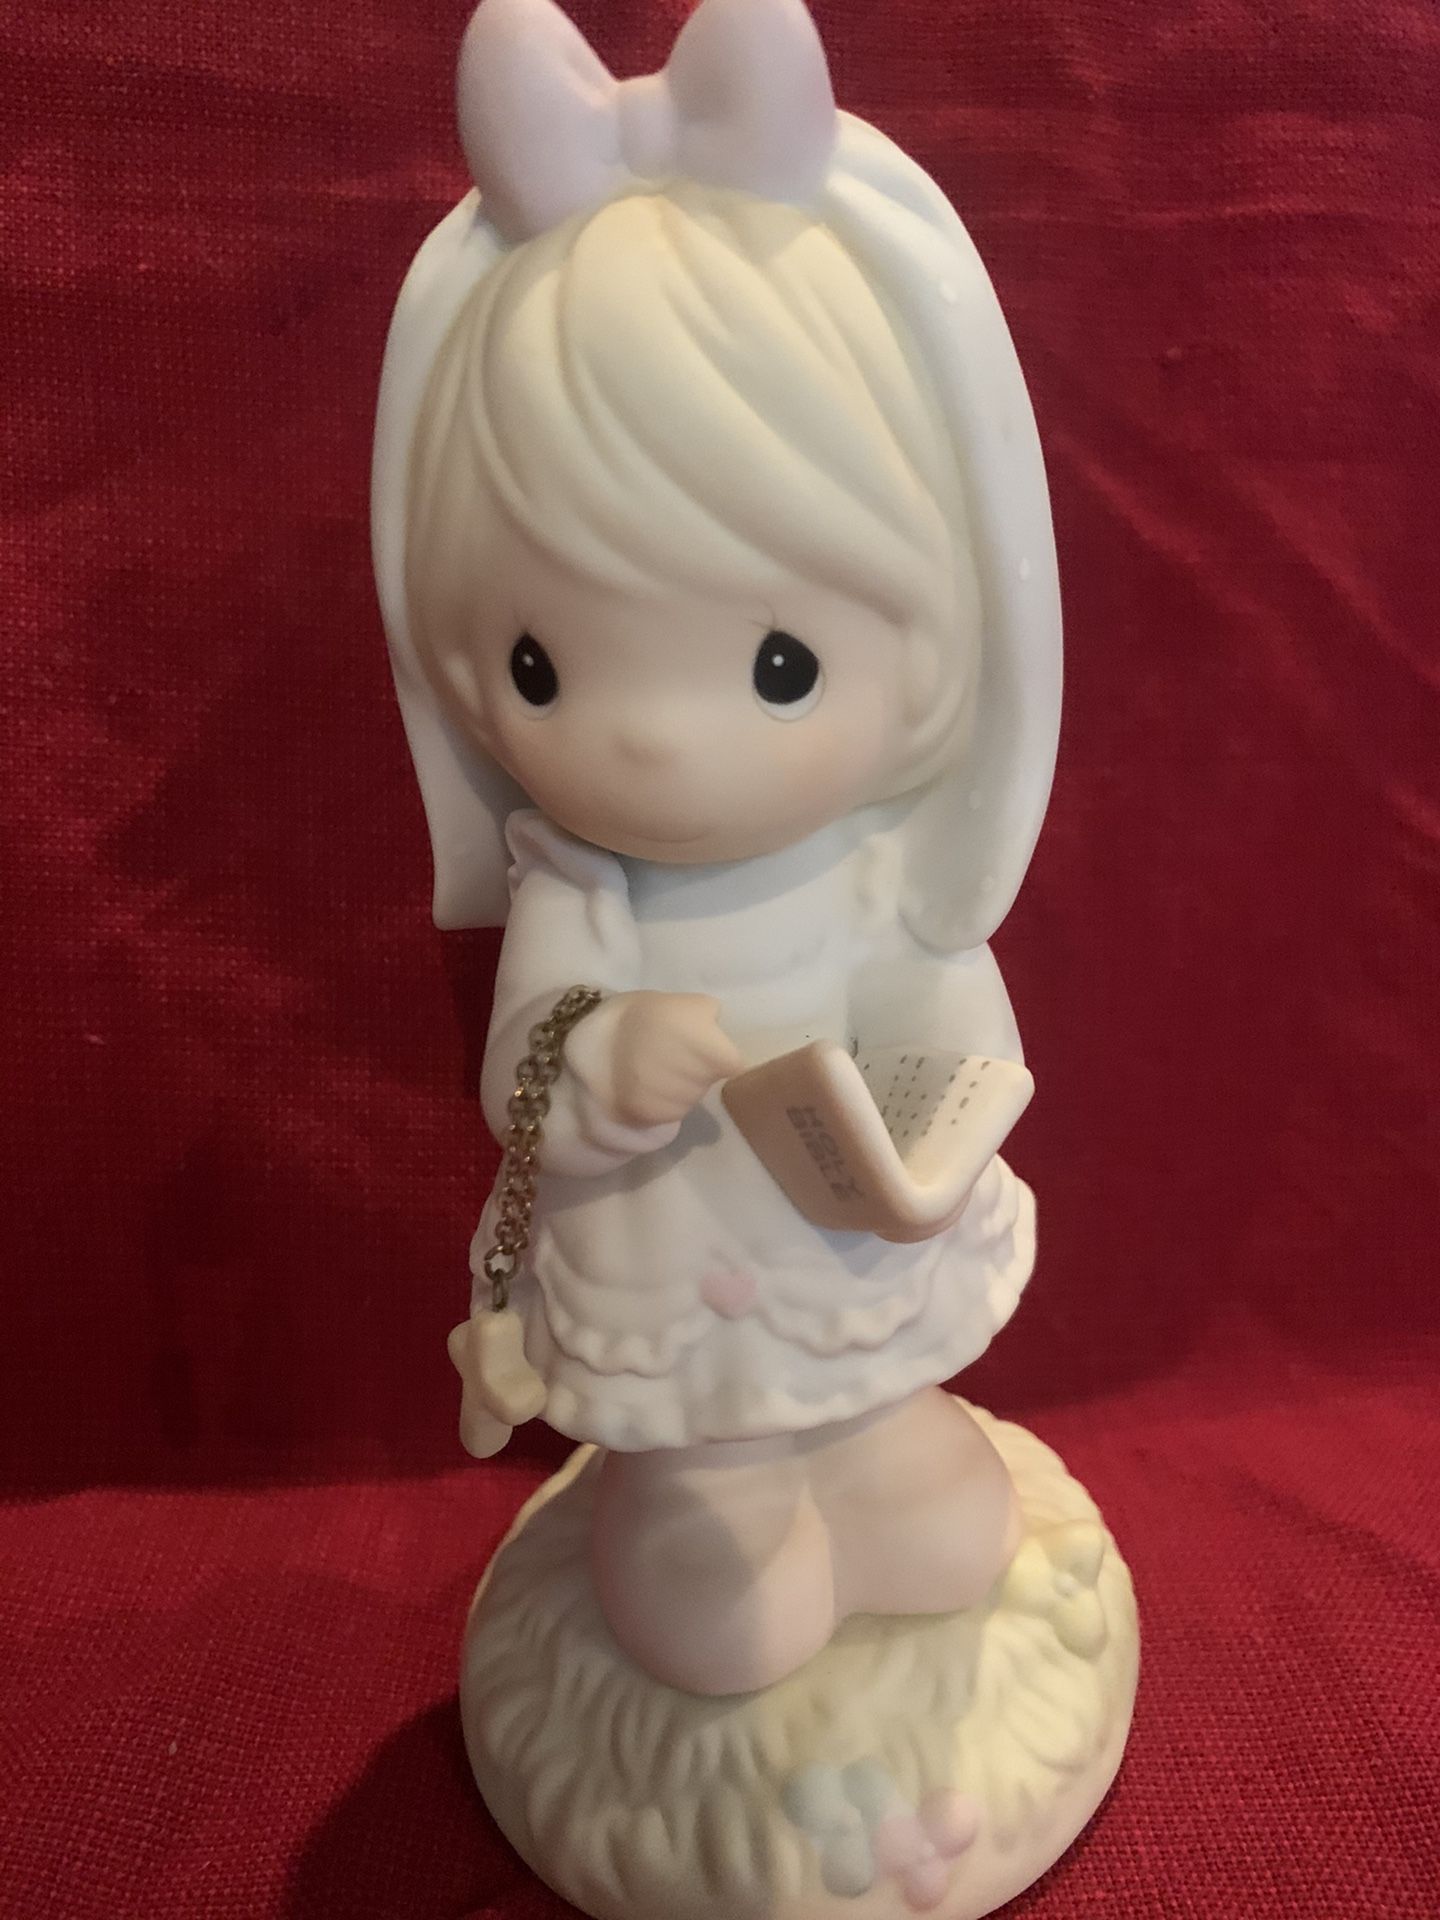 Precious Moments This day was made in Heaven figurine